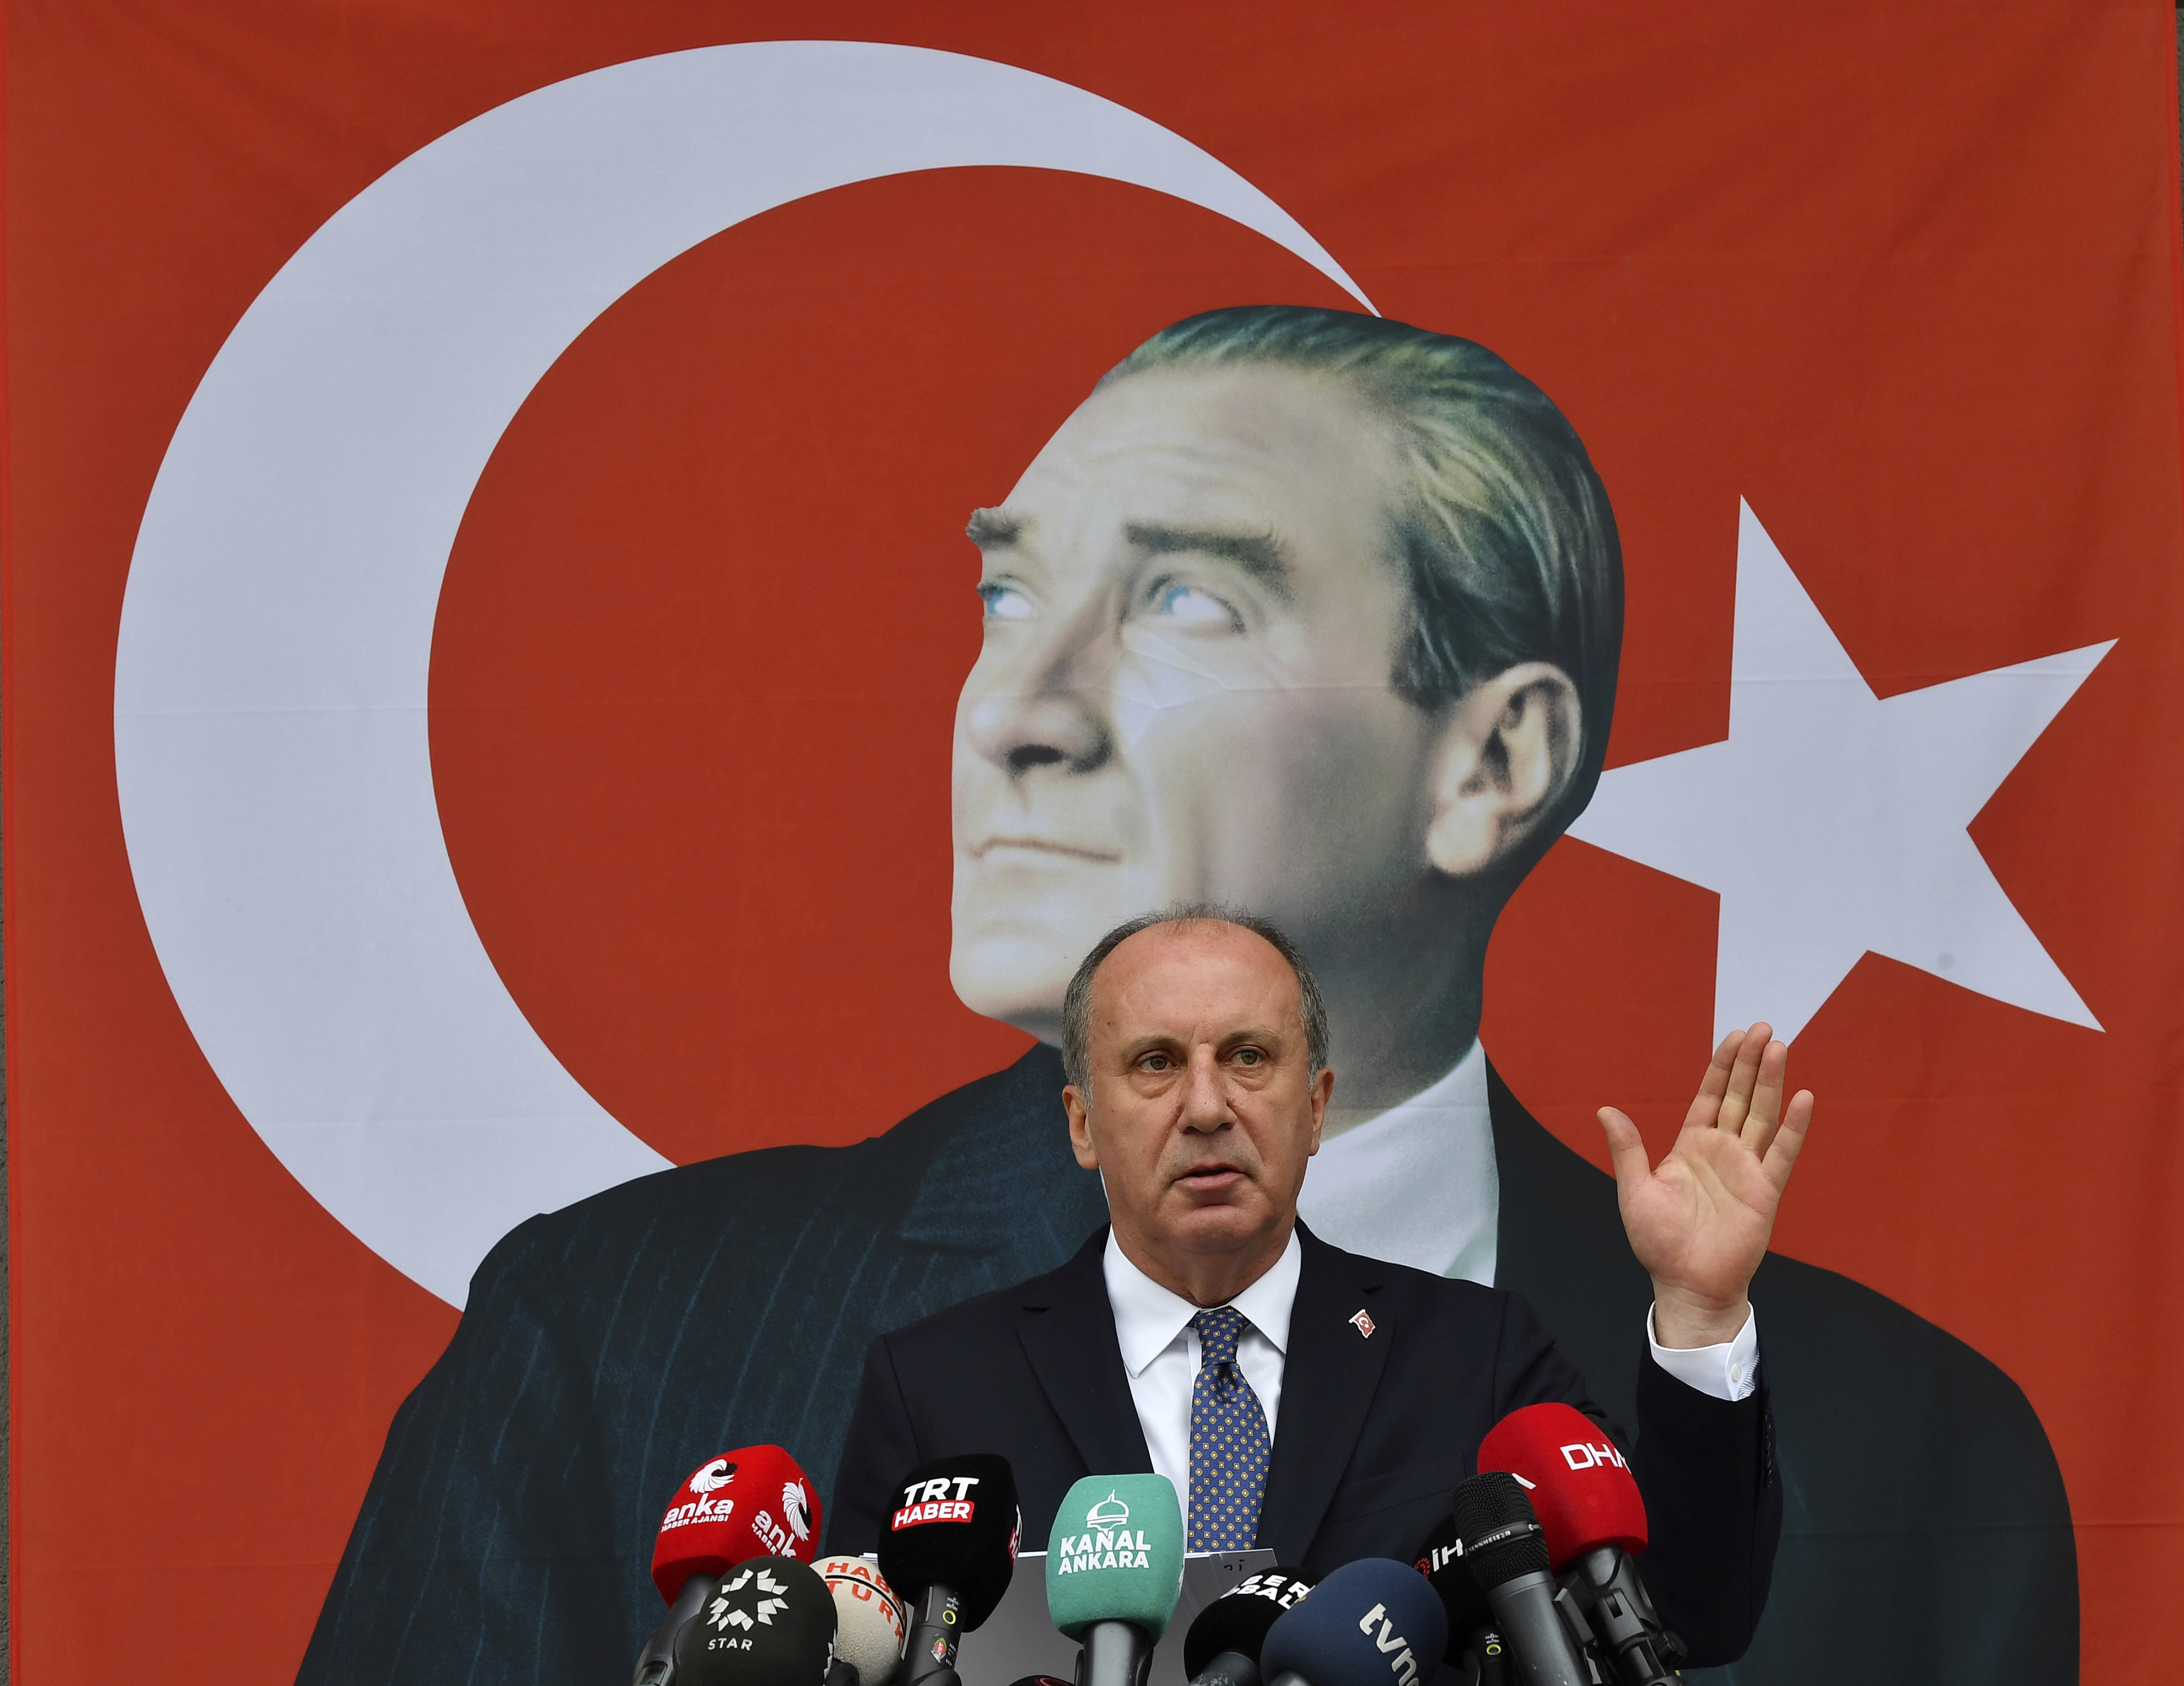 Muharrem Ince announces his resignation from Turkey’s main opposition party, CHP, next to a poster of modern Turkey’s founder, Mustafa Kemal Ataturk. Photo: AP